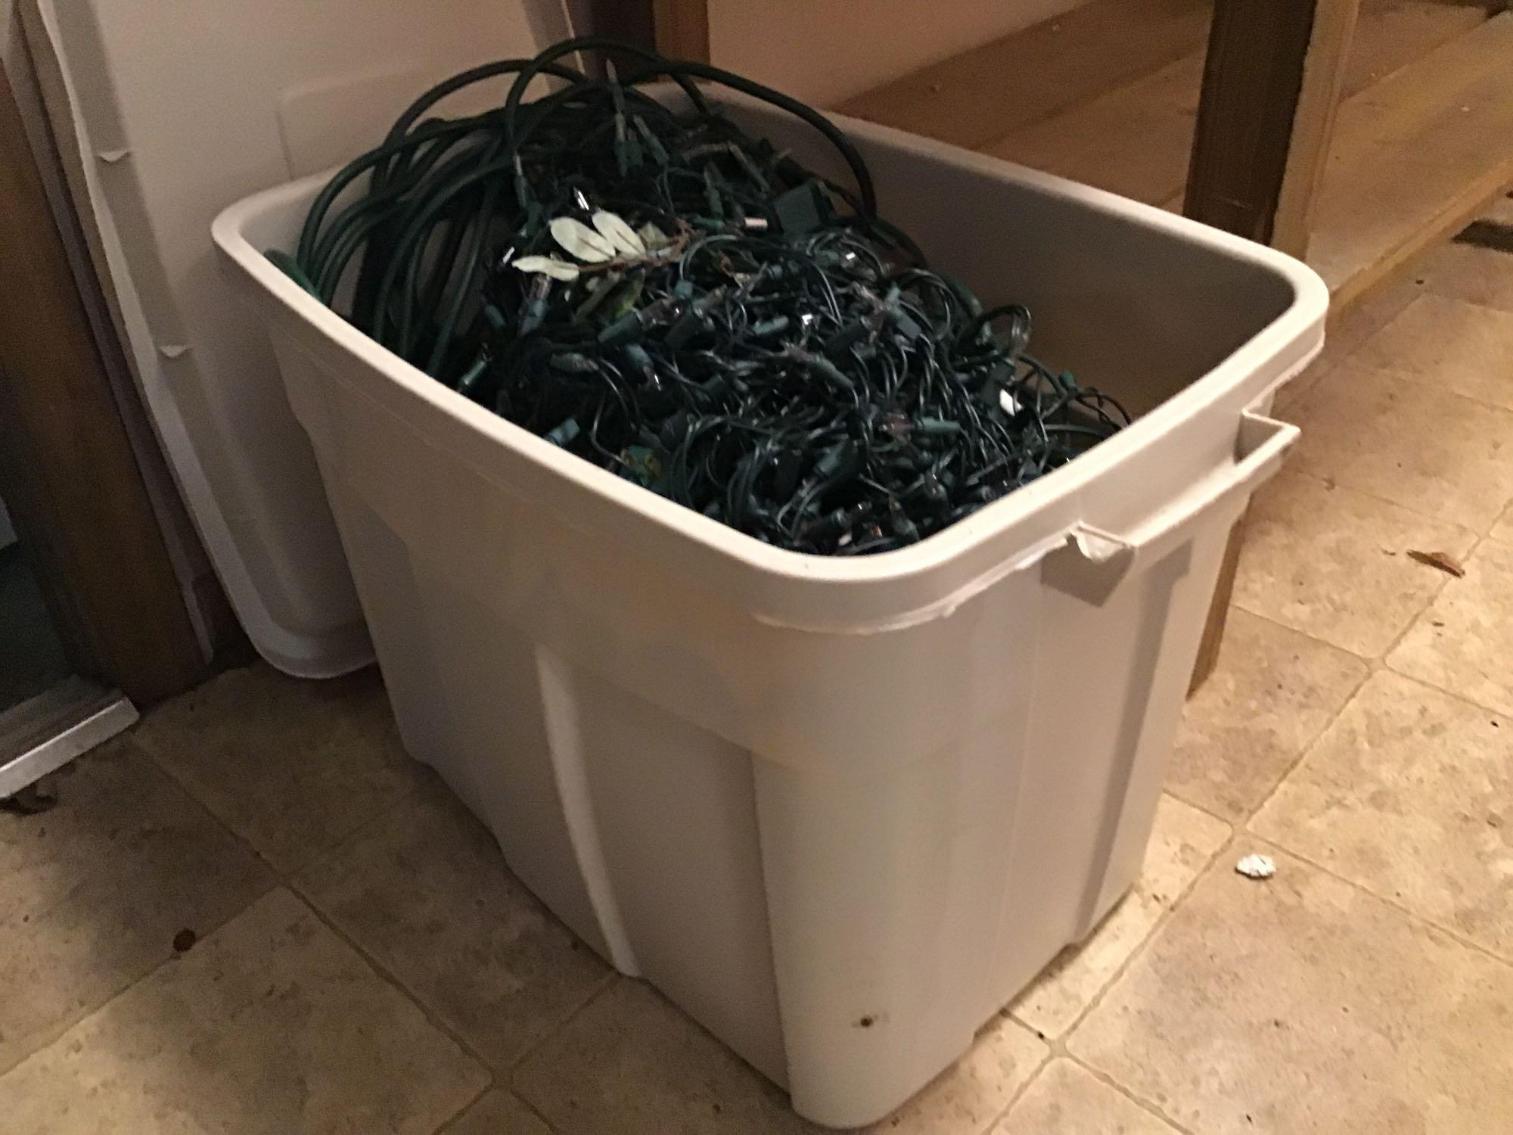 Image for Tote Full of Christmas Lights and Extension Cords